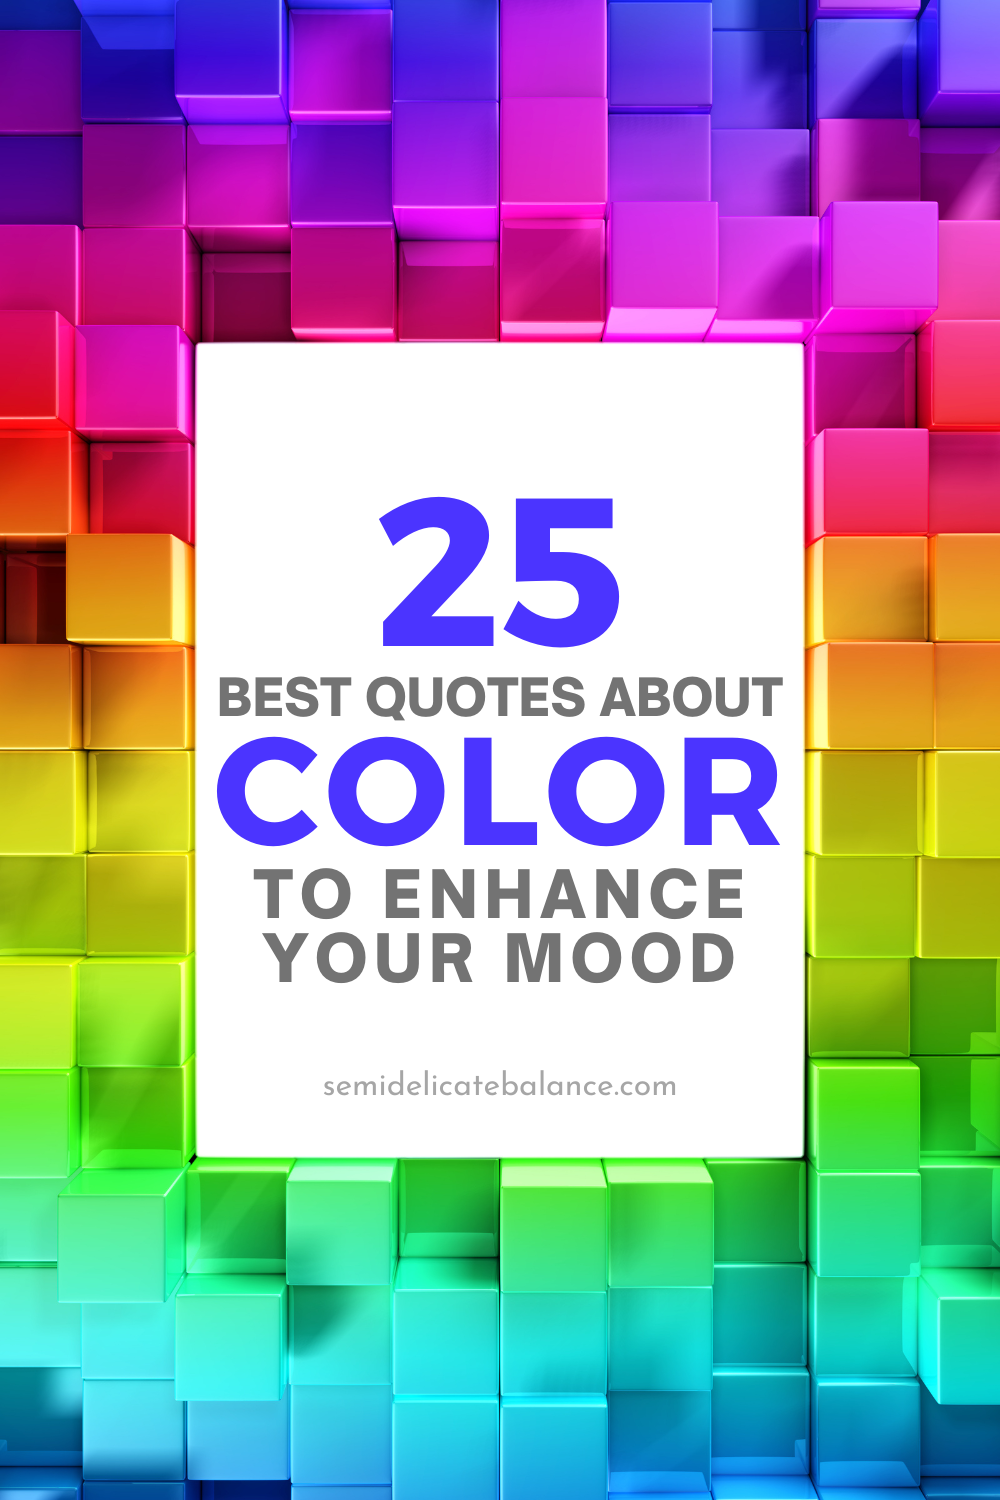 Best Quotes About Color To Enhance Your Mood, Colorful sayings